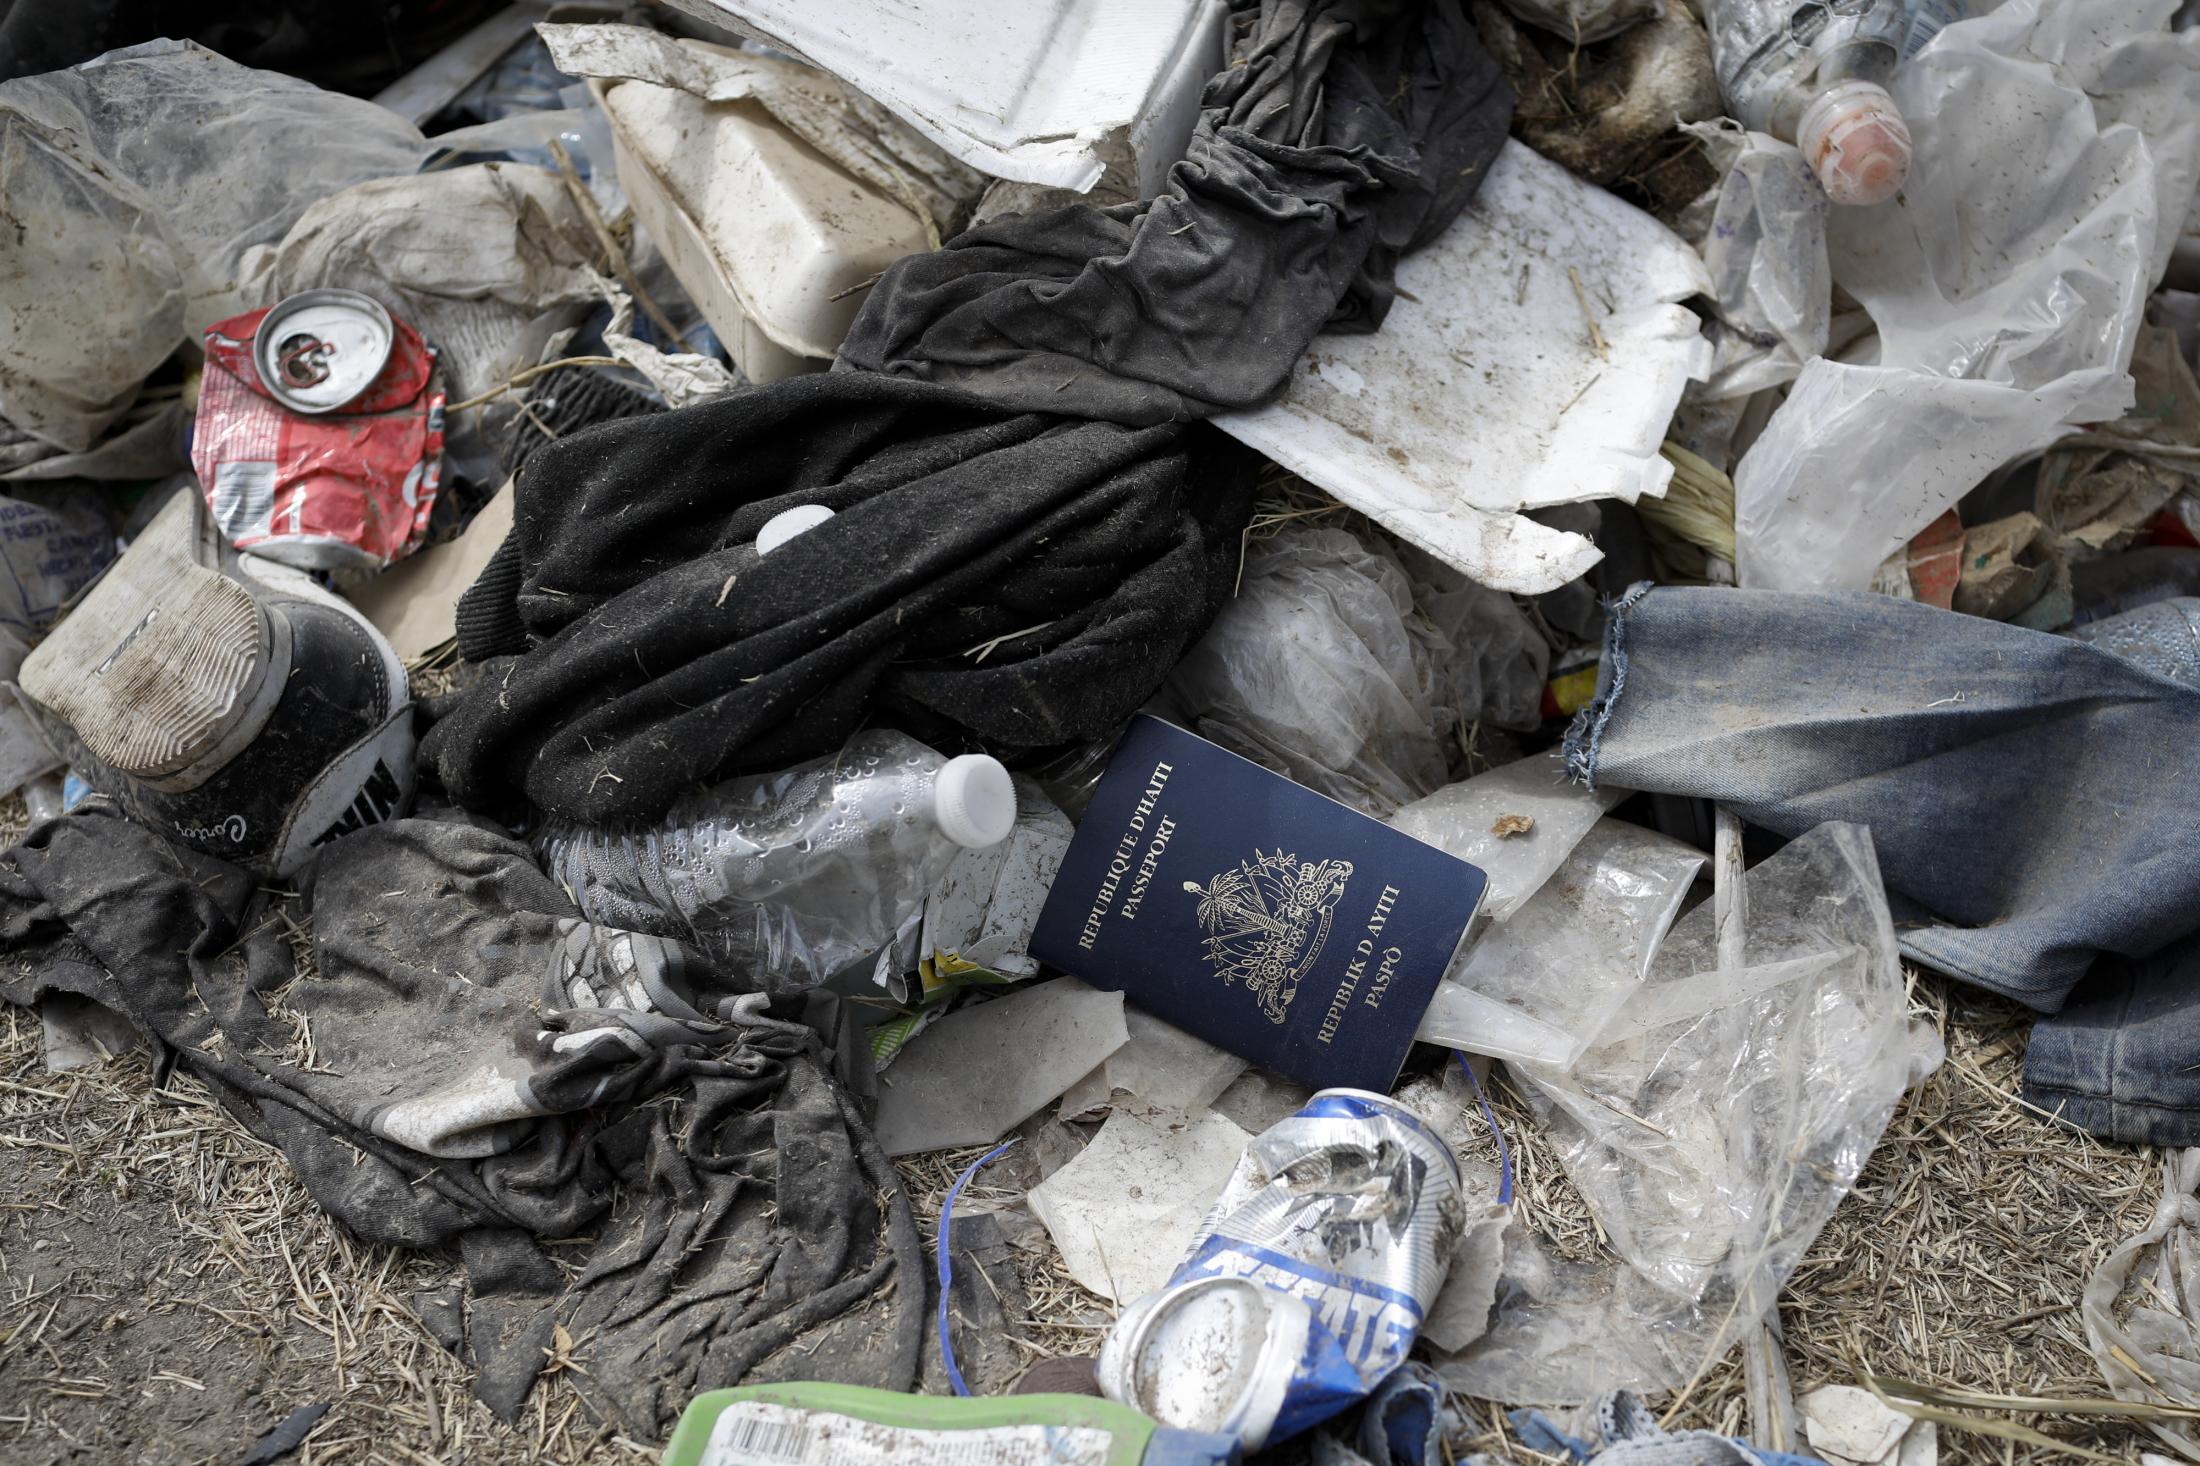 U.S. removes asylum-seeking migrants from Texas border camp - A Haitian passport is seen in a pile of trash near the...